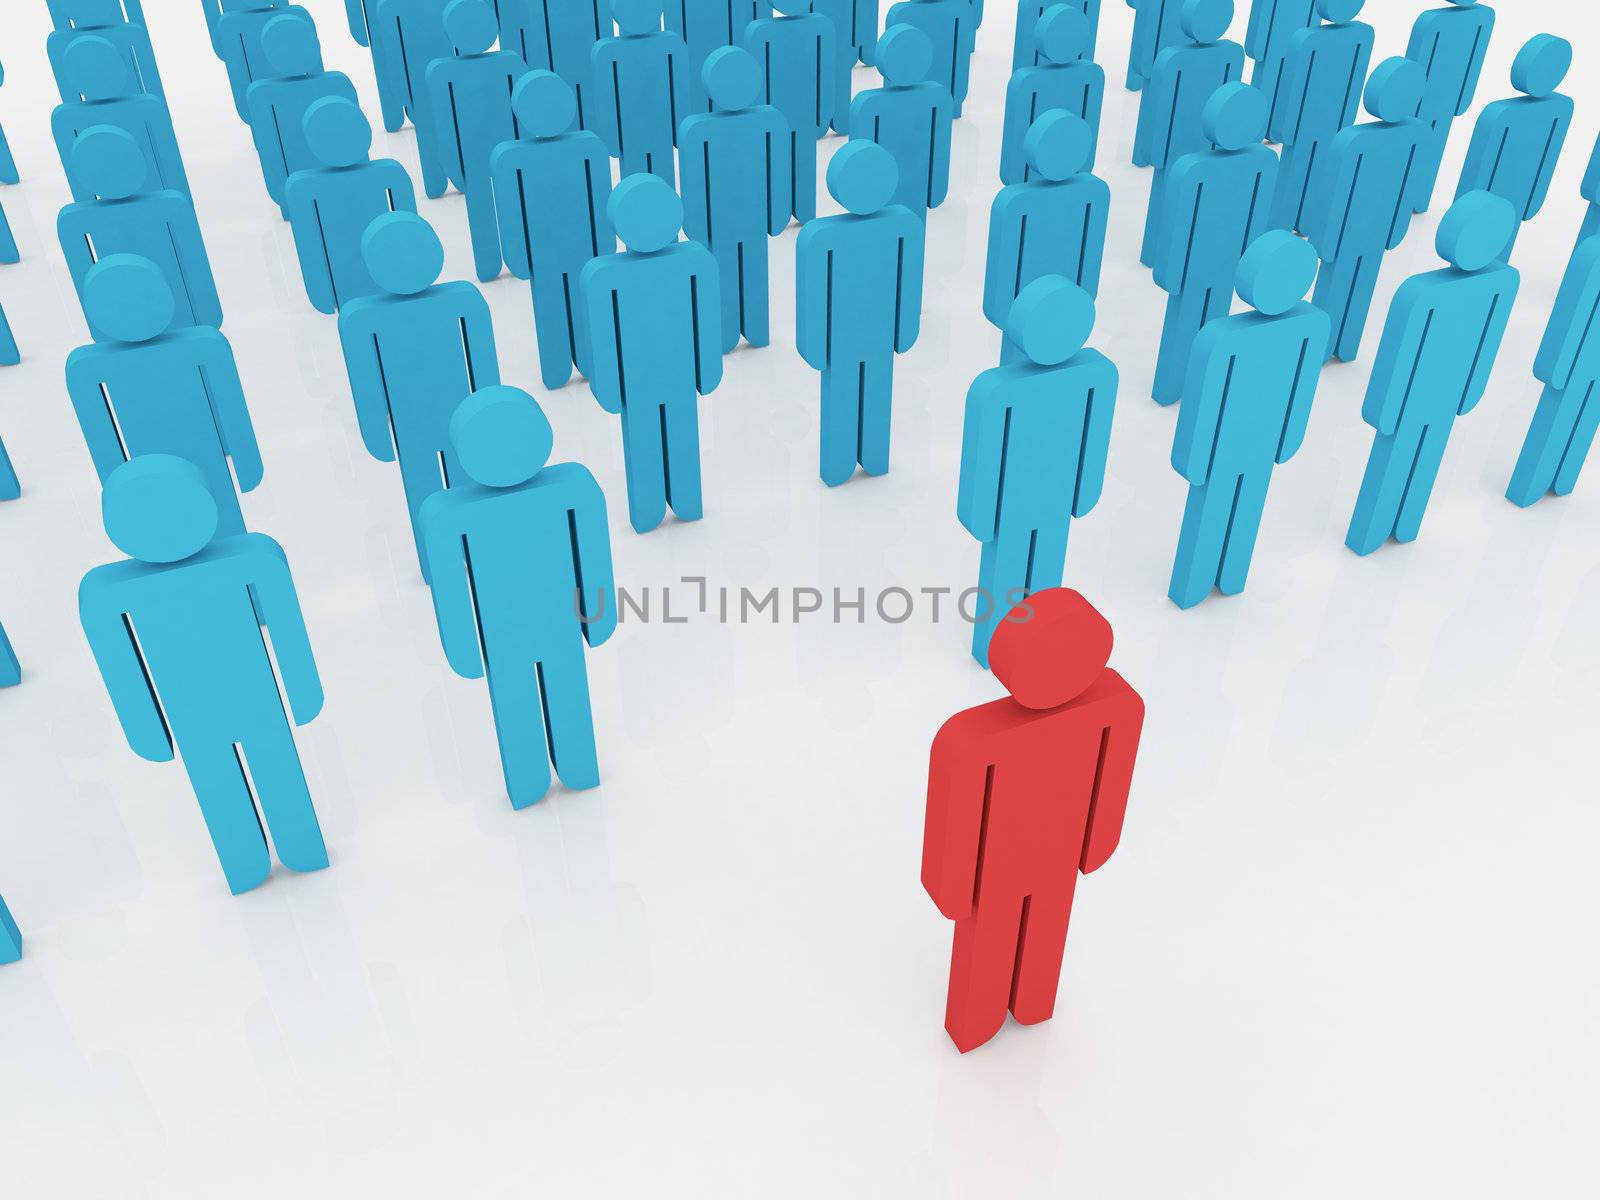 Concept for a remarkable, eye-catching person, someone standing out from the crowd in a positive way